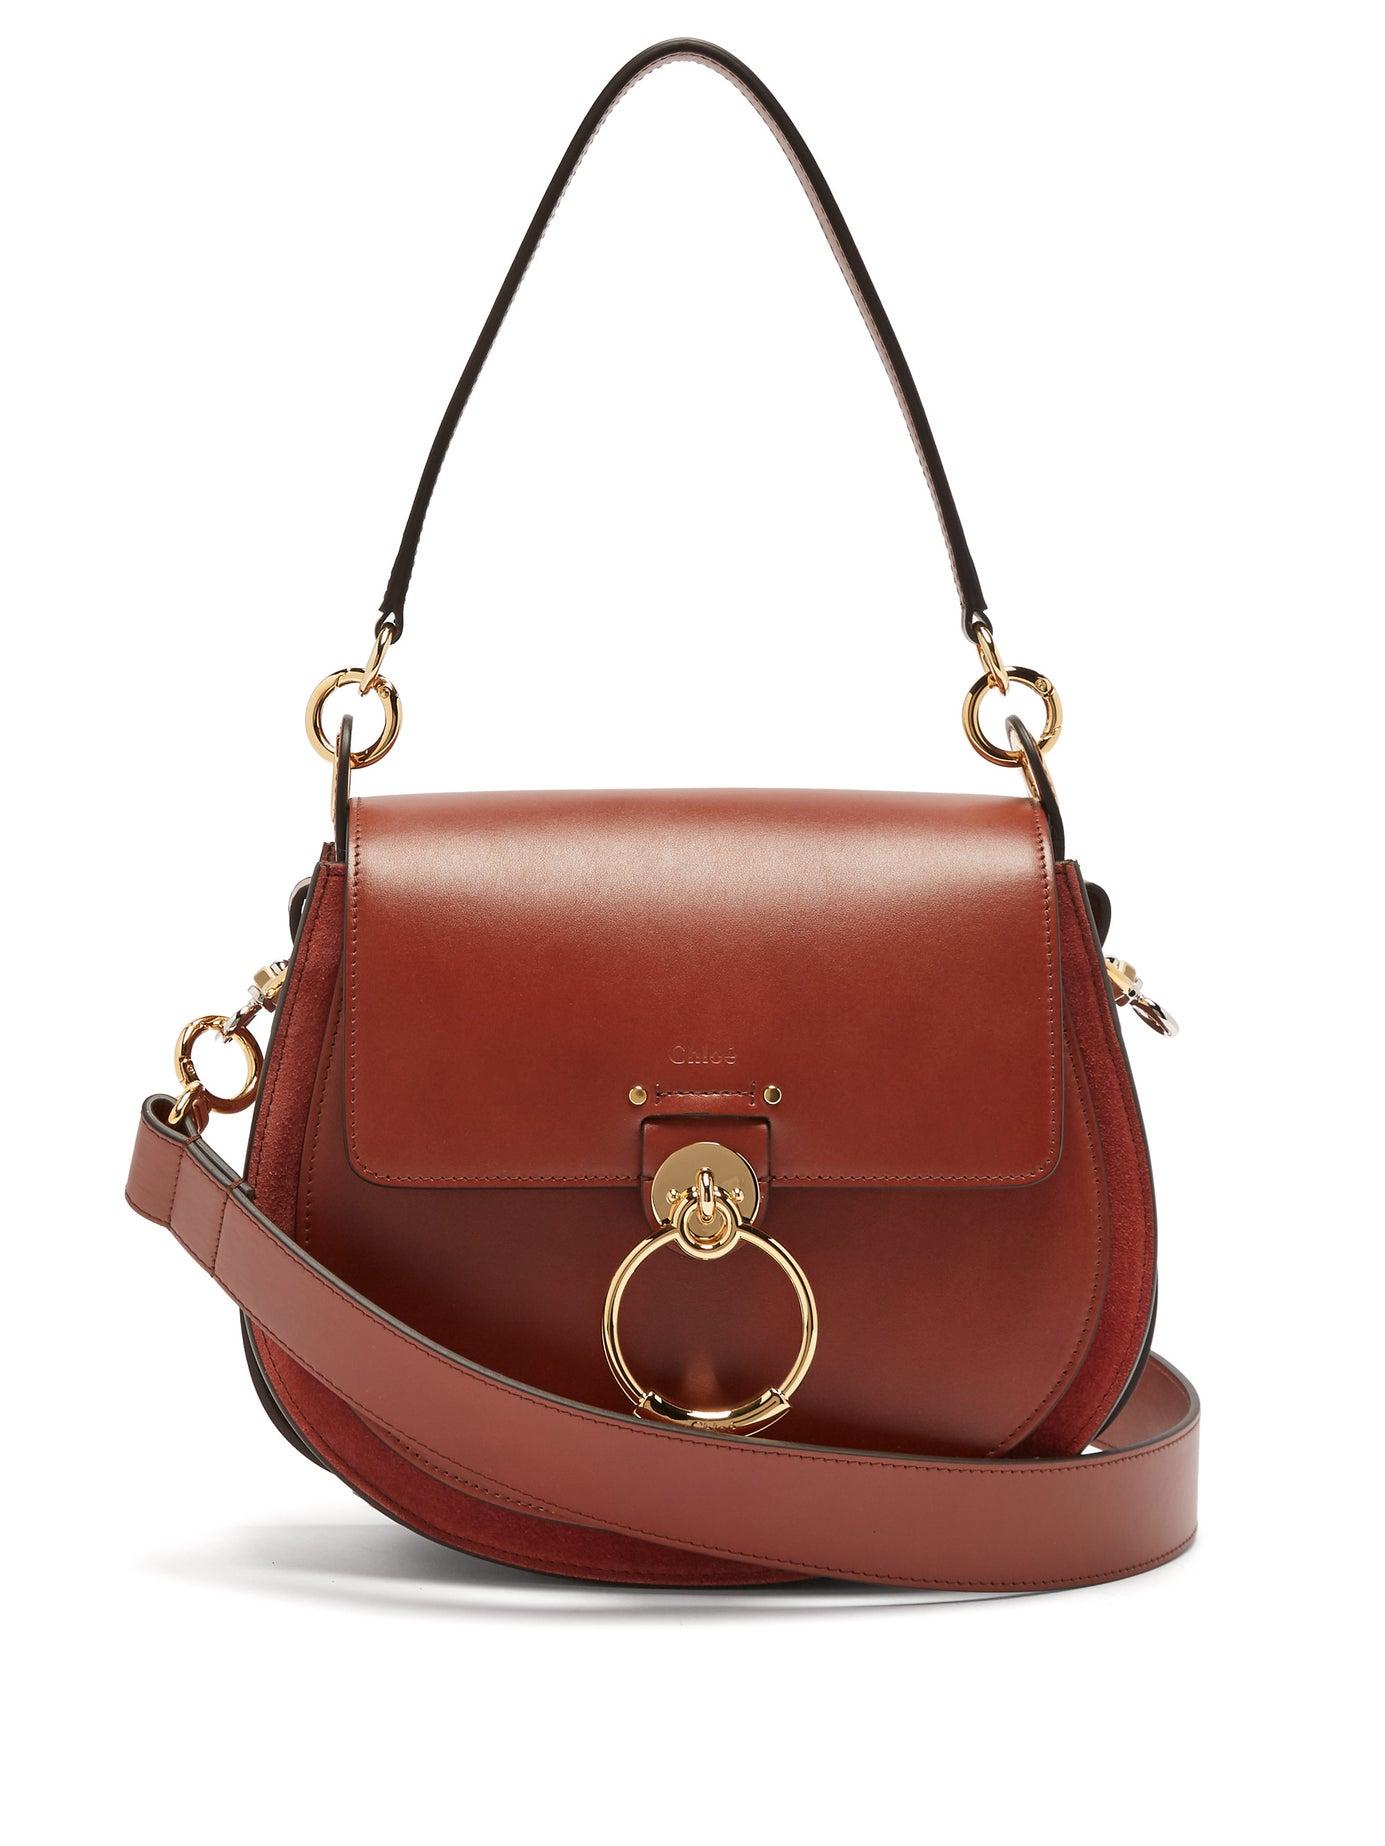 Chloé Tess Small Leather Cross Body Bag in Brown - Lyst